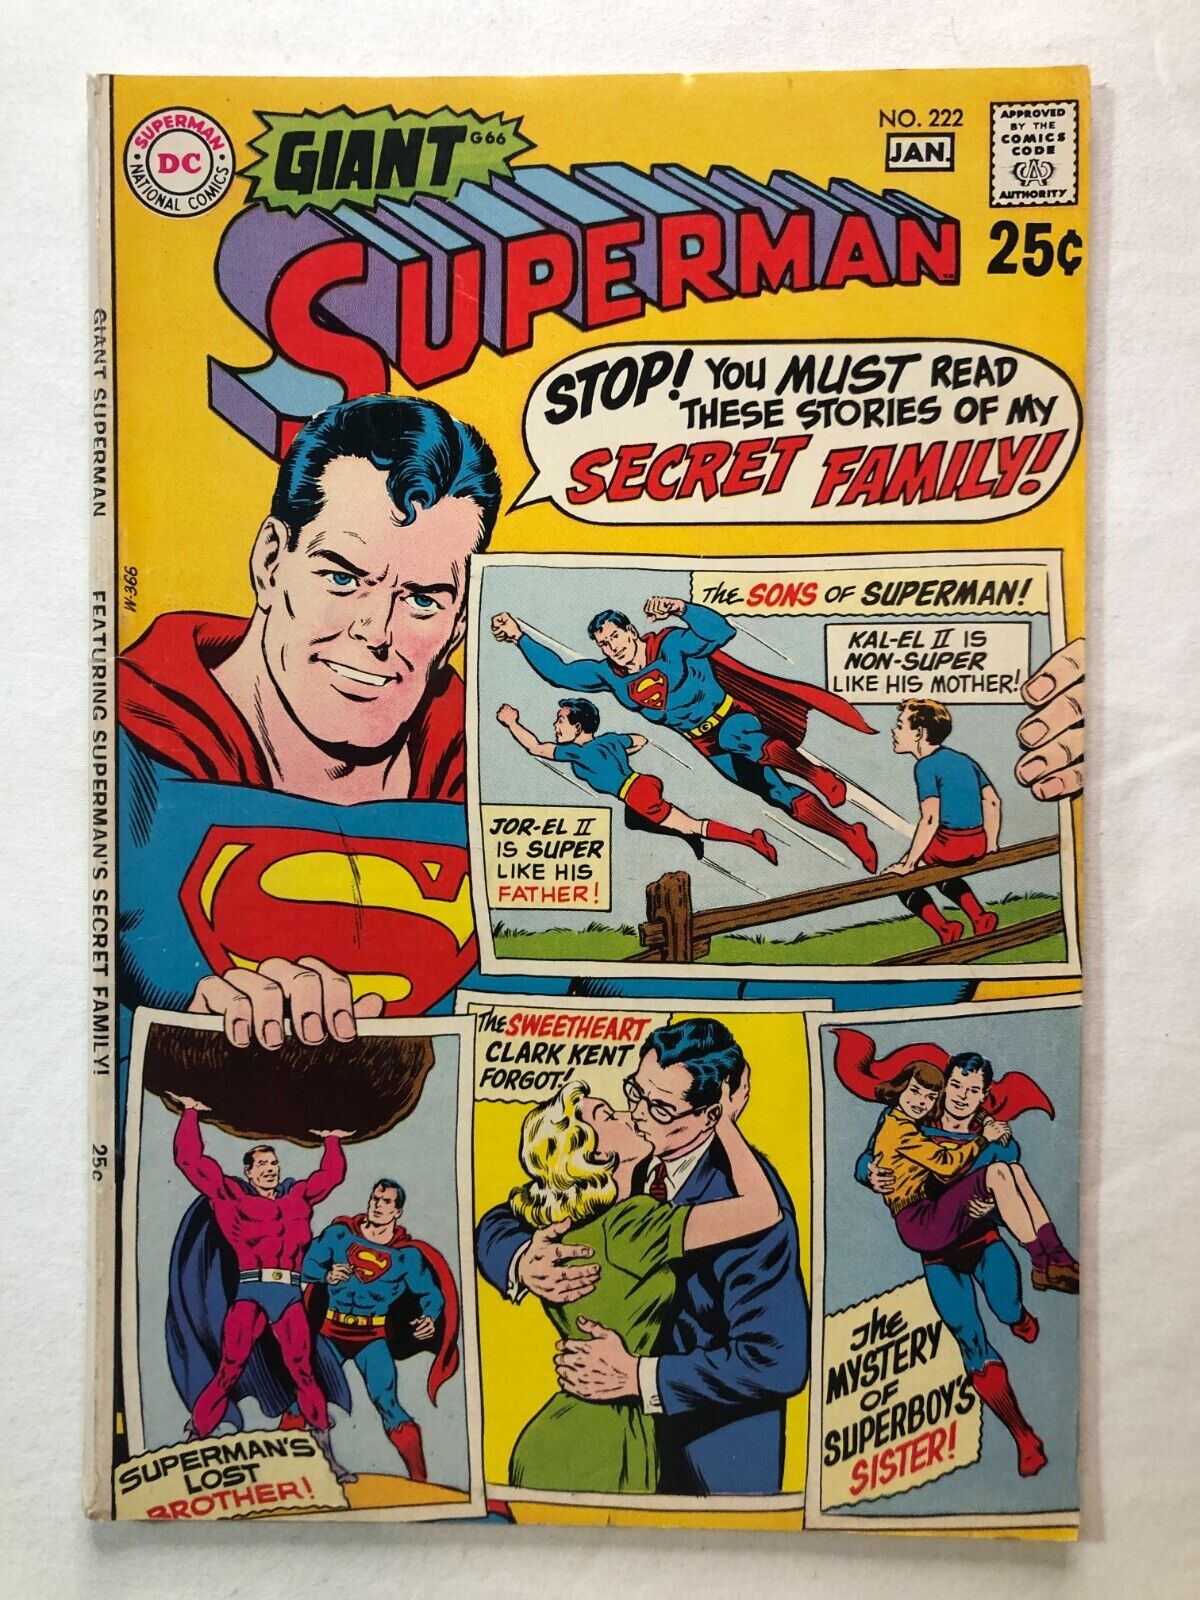 Superman #222 Giant January 1969 Vintage Silver Age DC Great Condition